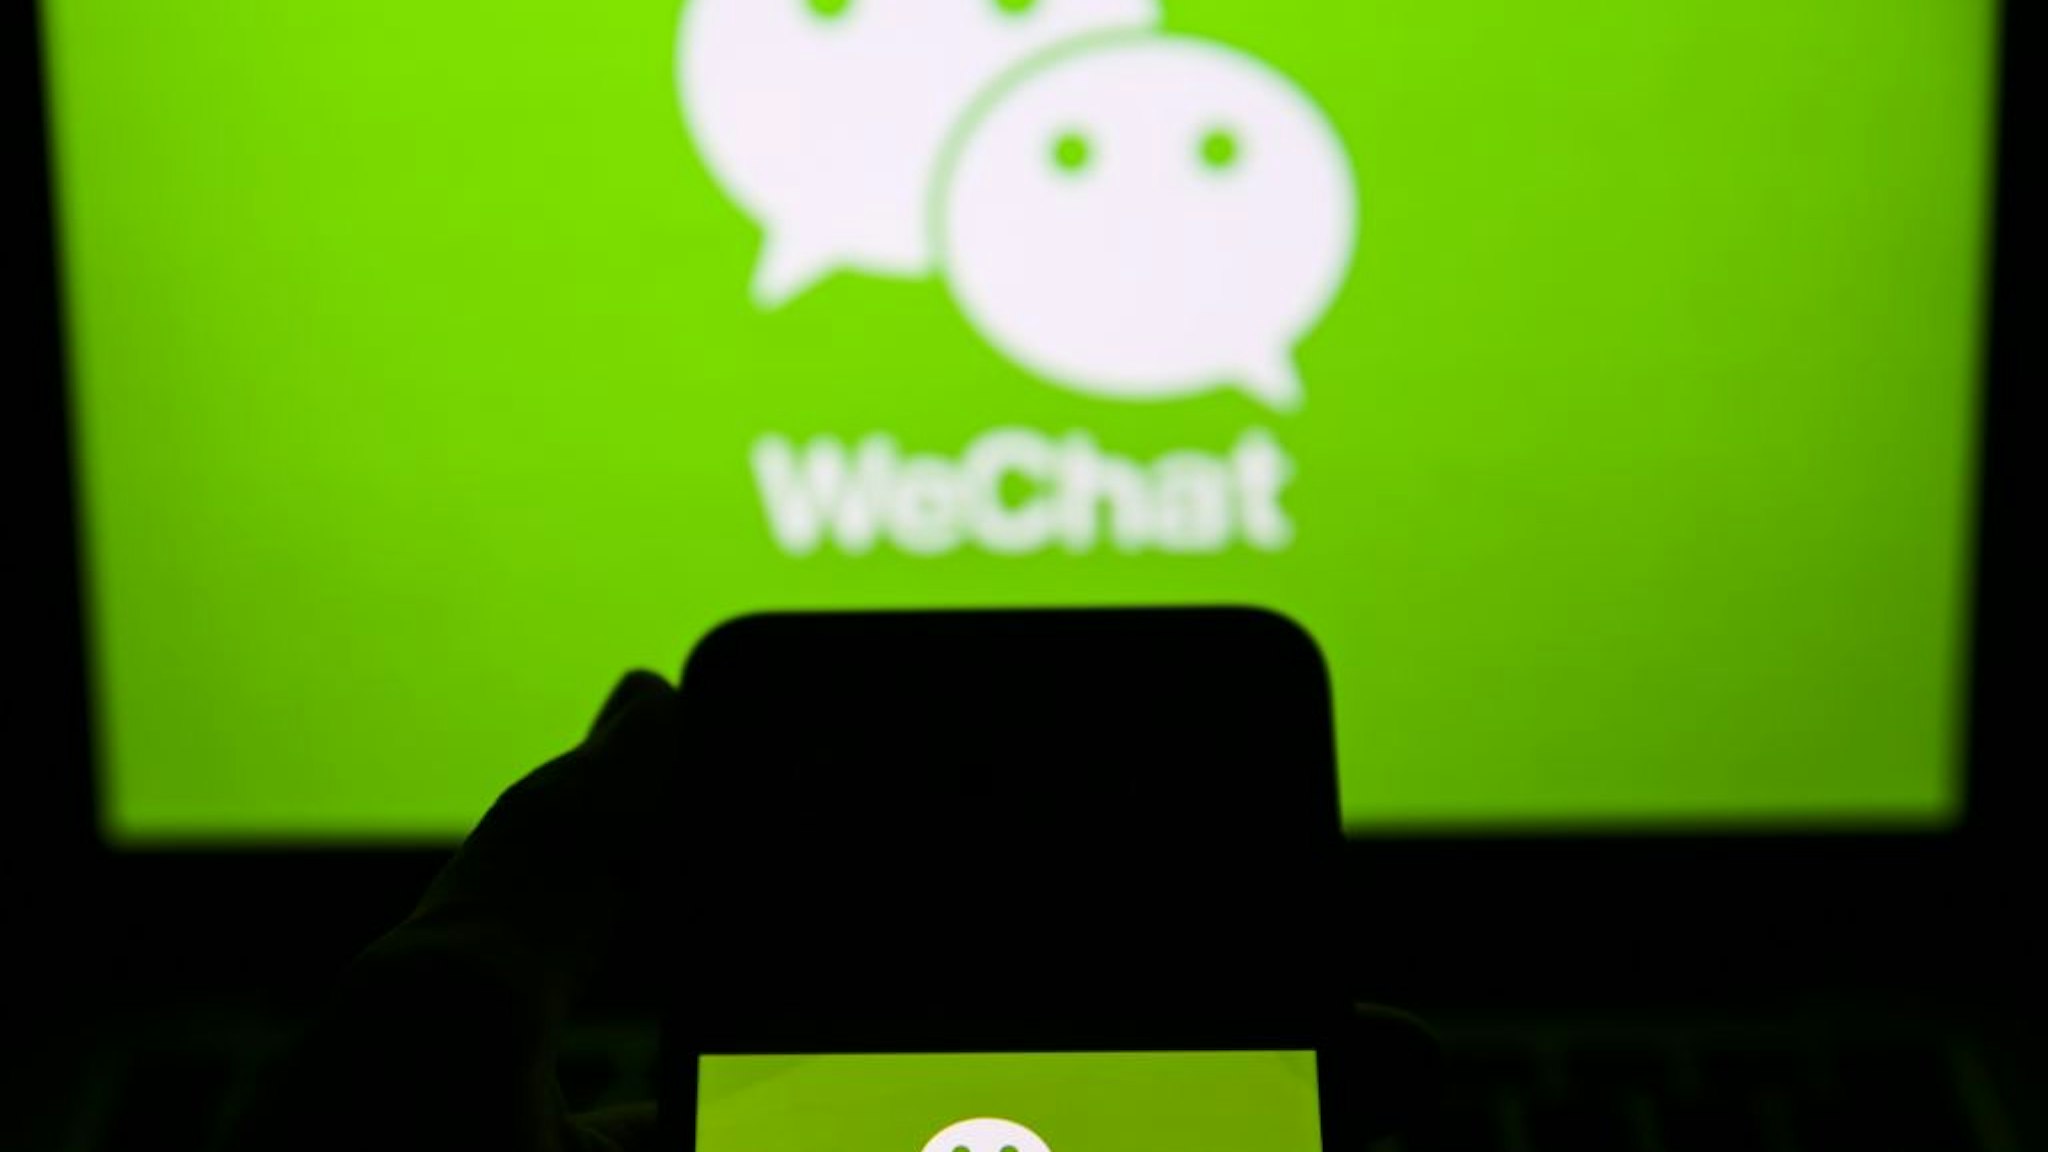 The logo of "WeChat", messaging and social media app, is seen on a screen of a smartphone in Ankara, Turkey on November 28, 2019.